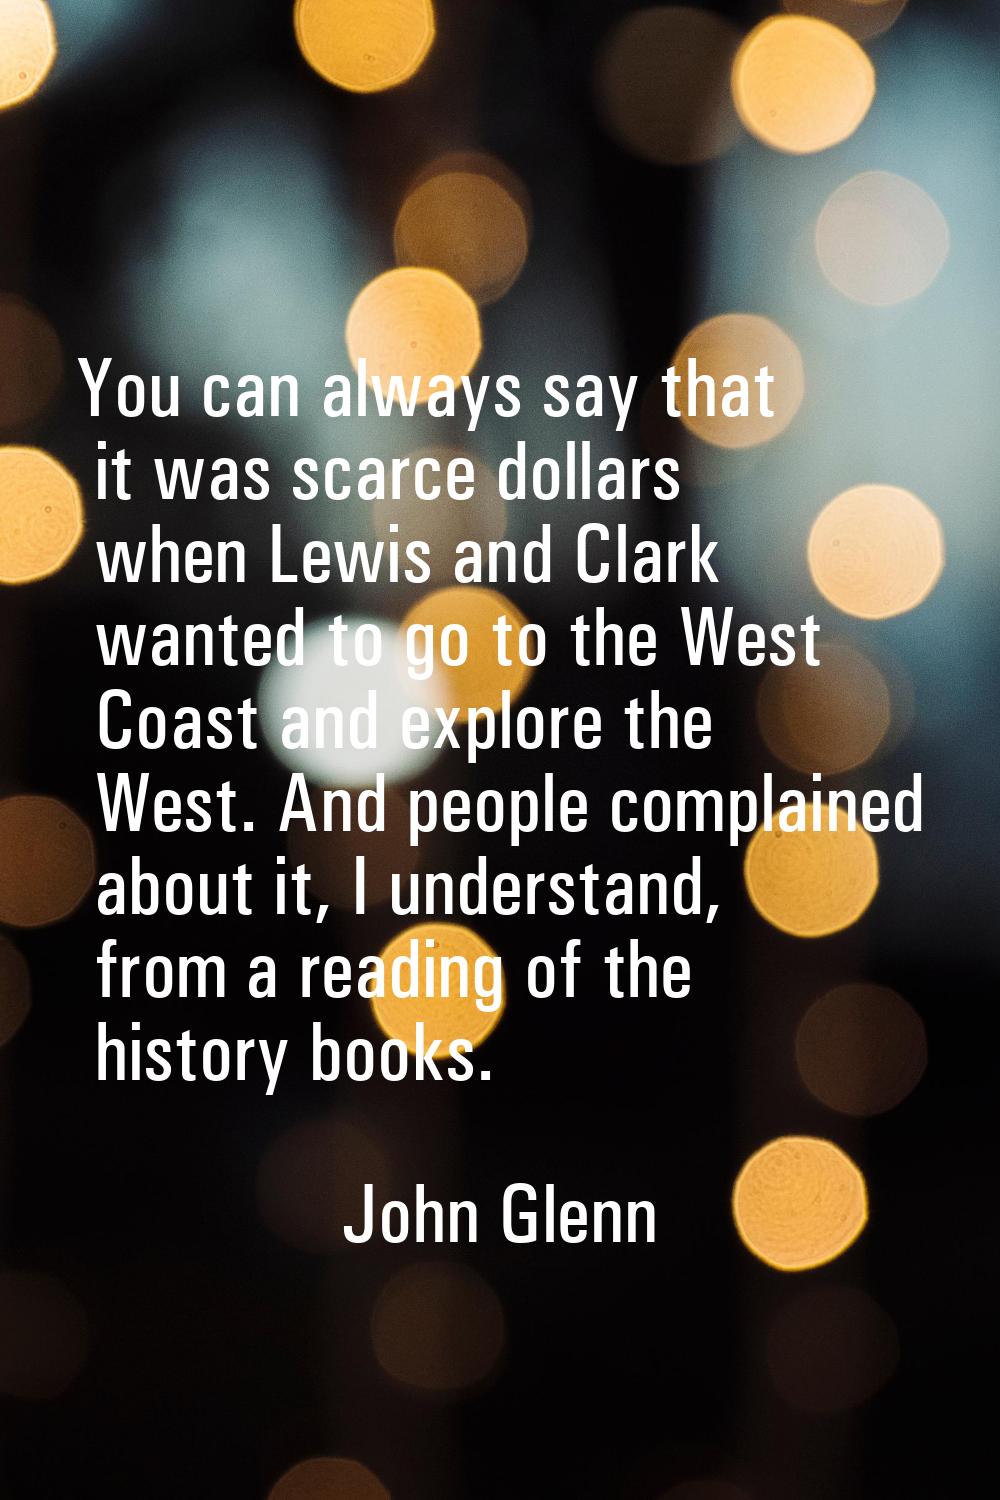 You can always say that it was scarce dollars when Lewis and Clark wanted to go to the West Coast a